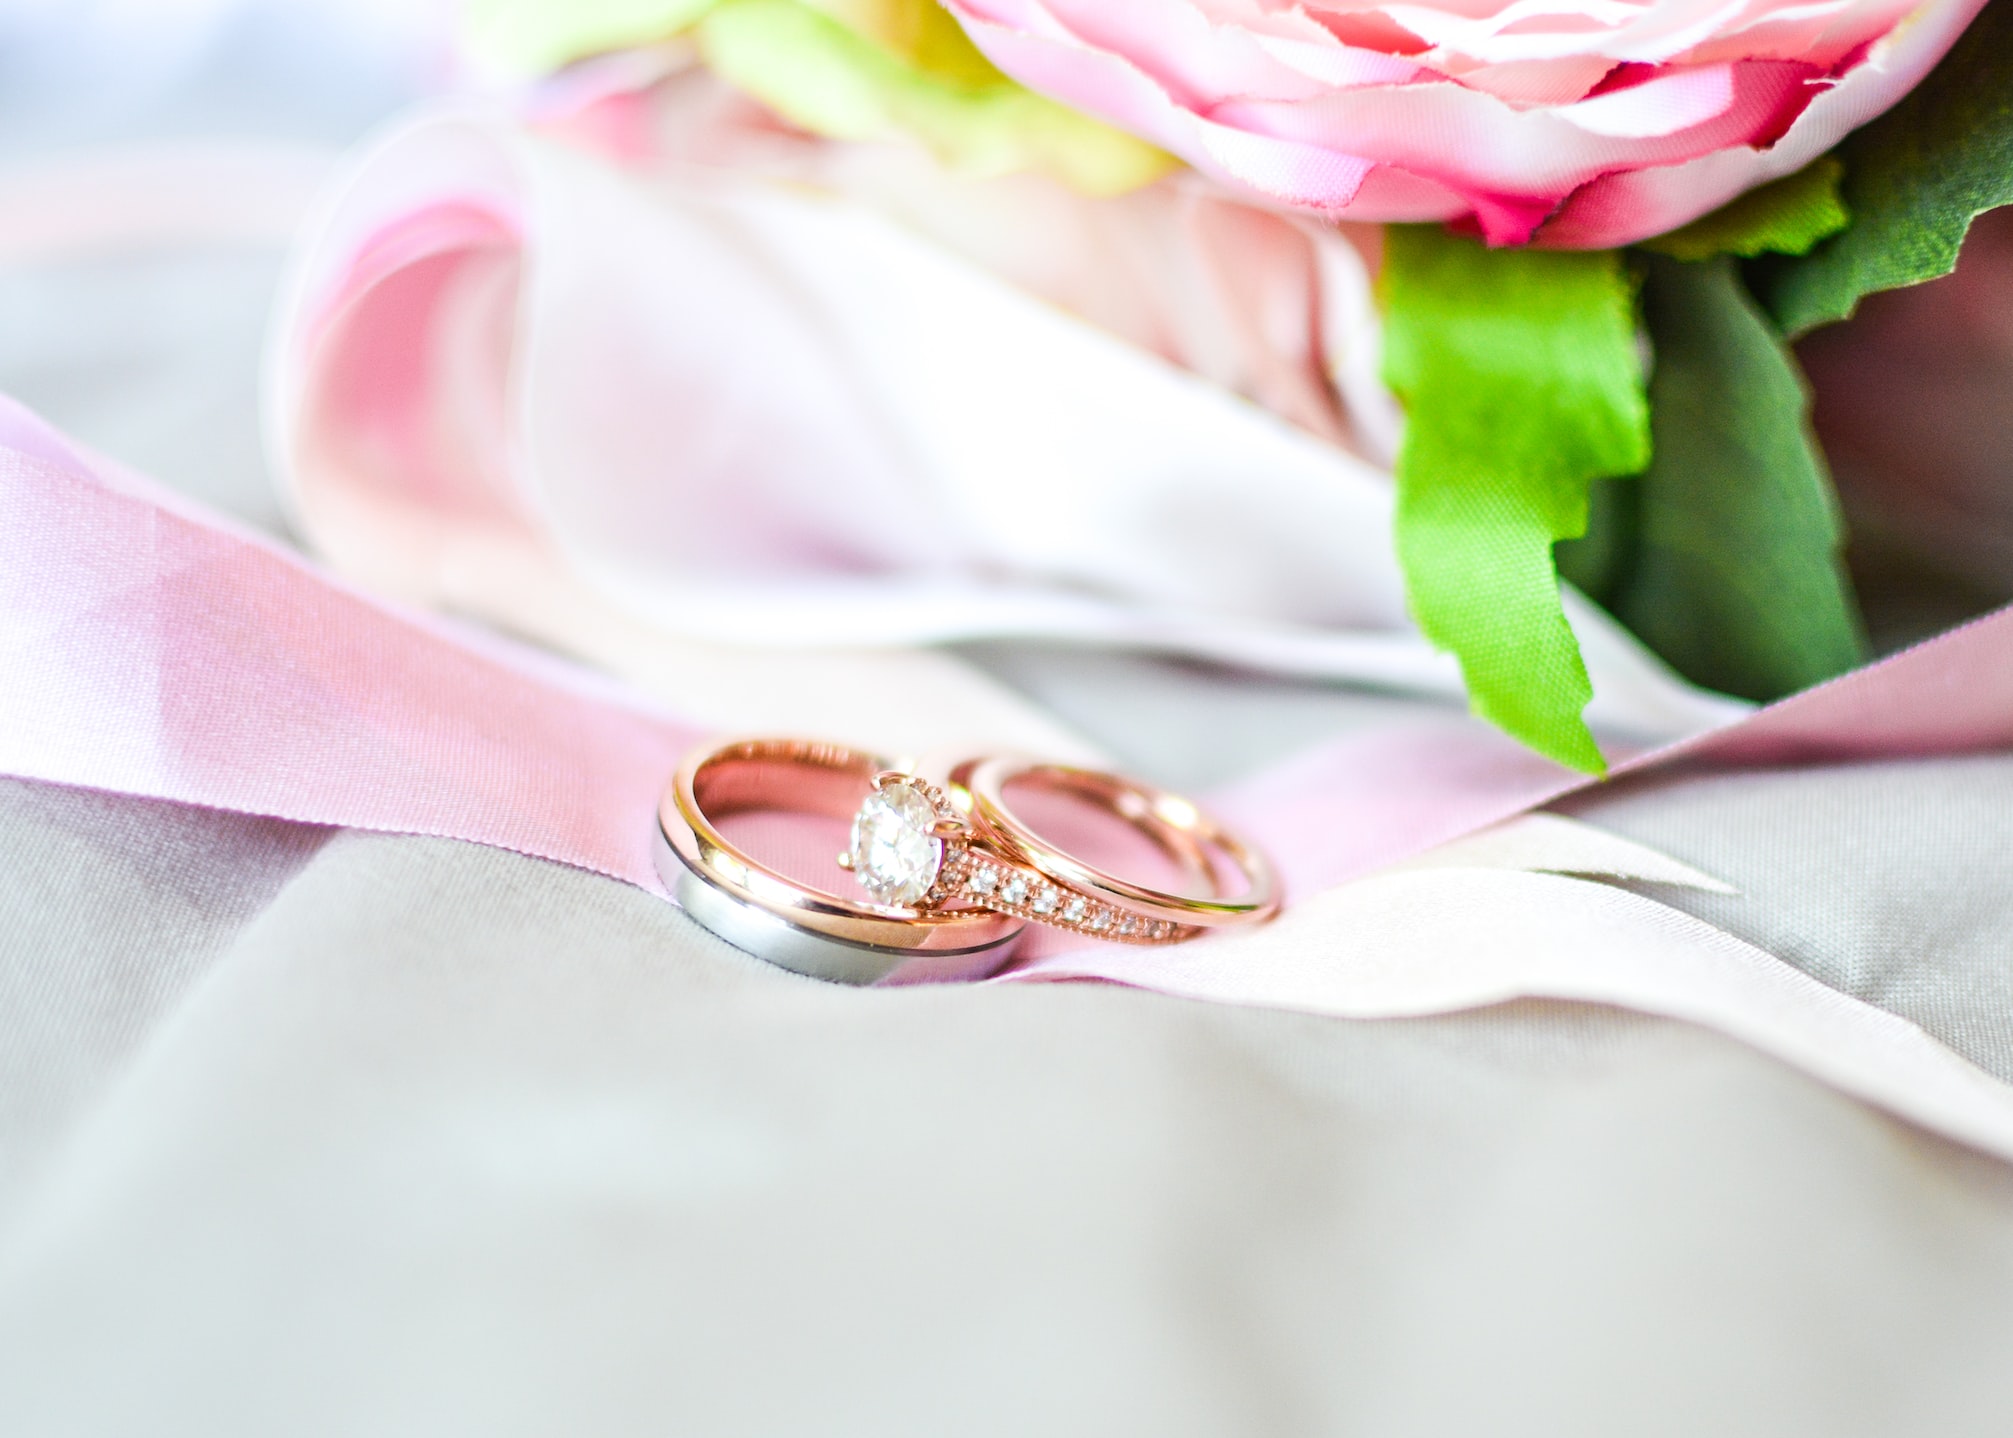 Can You Get a Personal Loan to Finance a Wedding Ring?